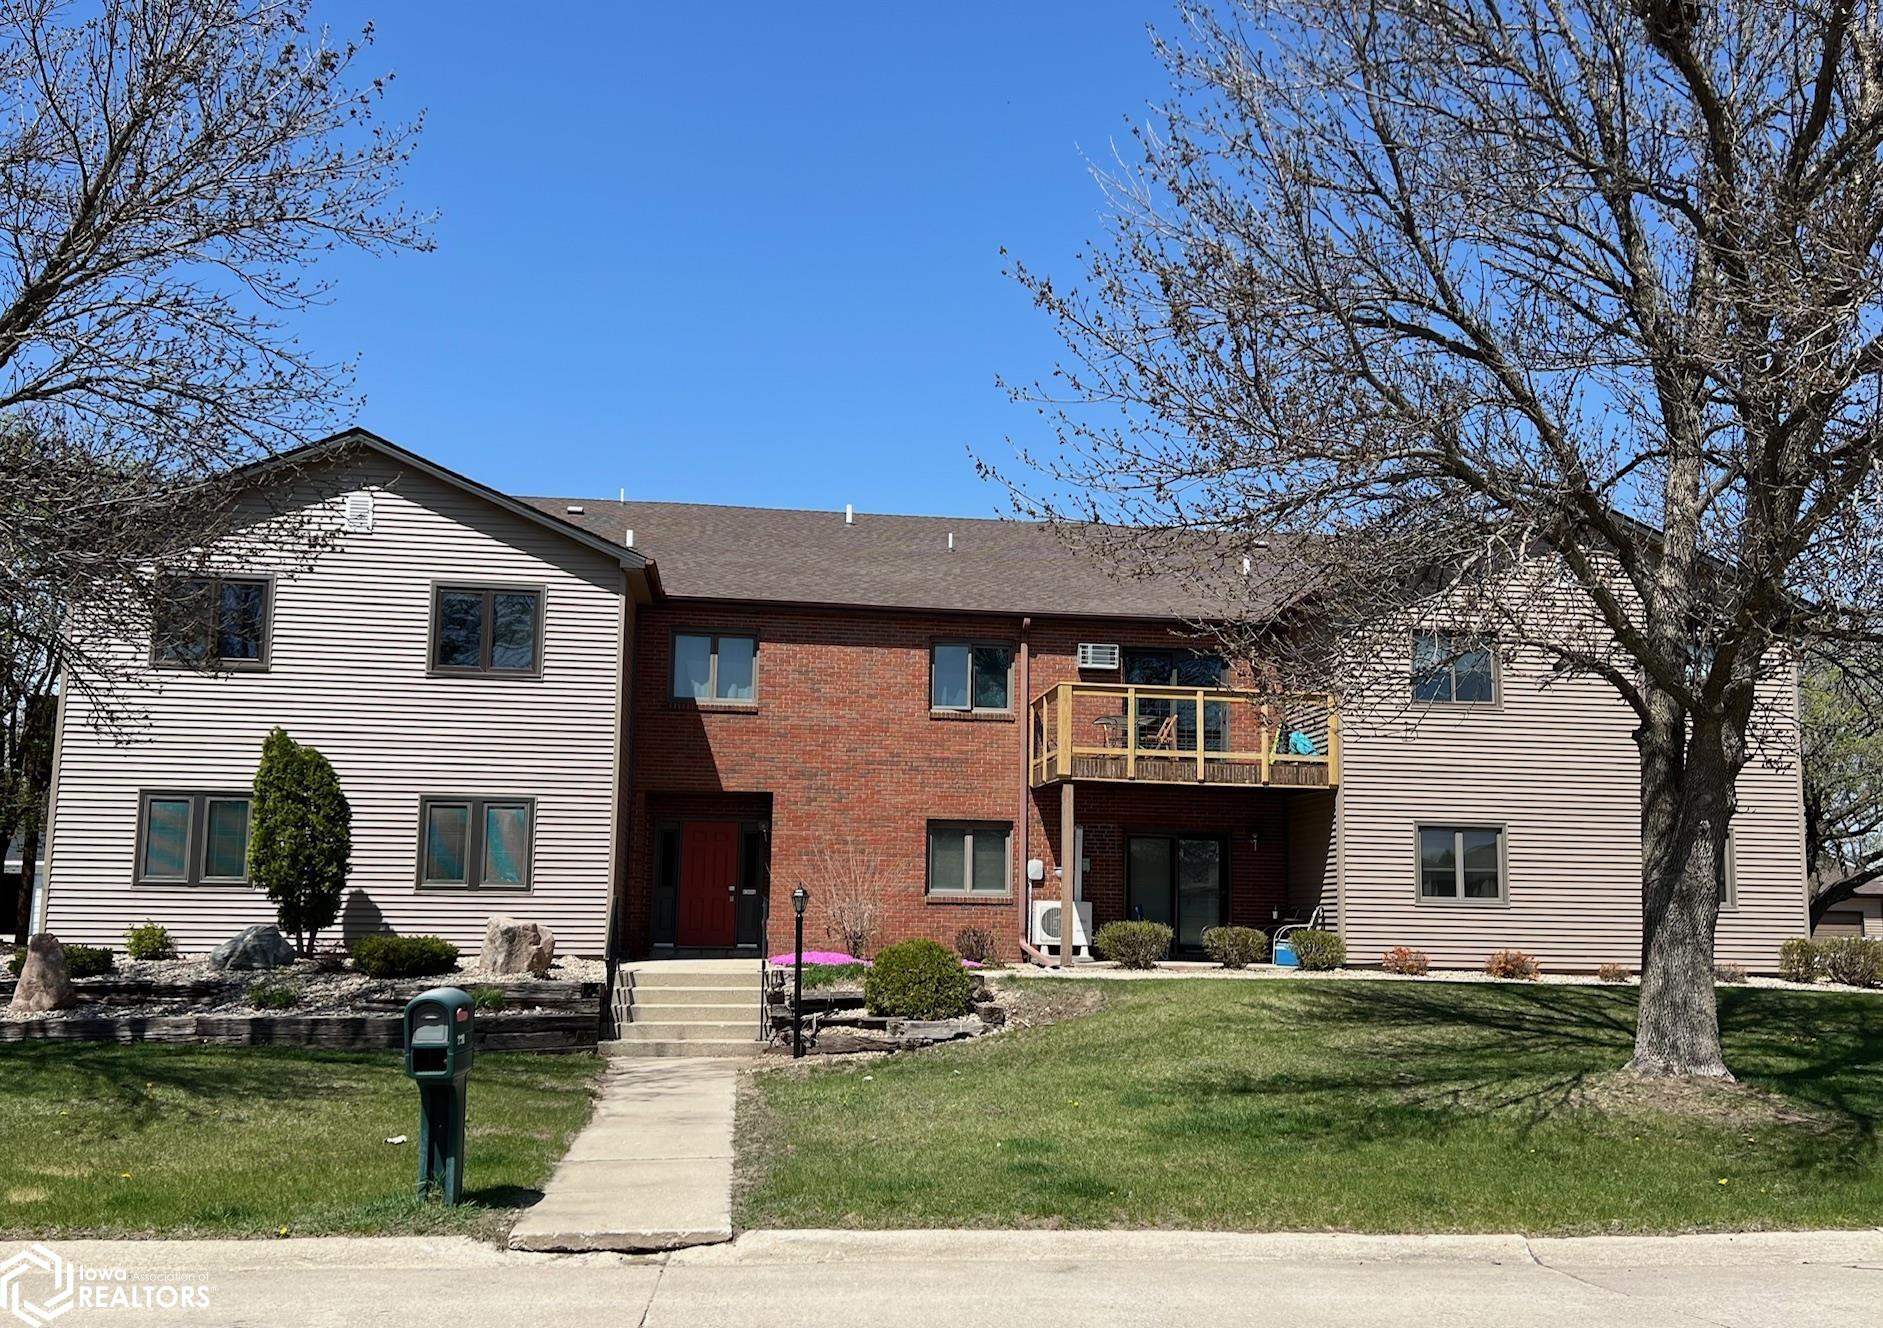 2110 14th, Clear Lake, Iowa 50428, 2 Bedrooms Bedrooms, ,1 BathroomBathrooms,Single Family,For Sale,14th,6316811